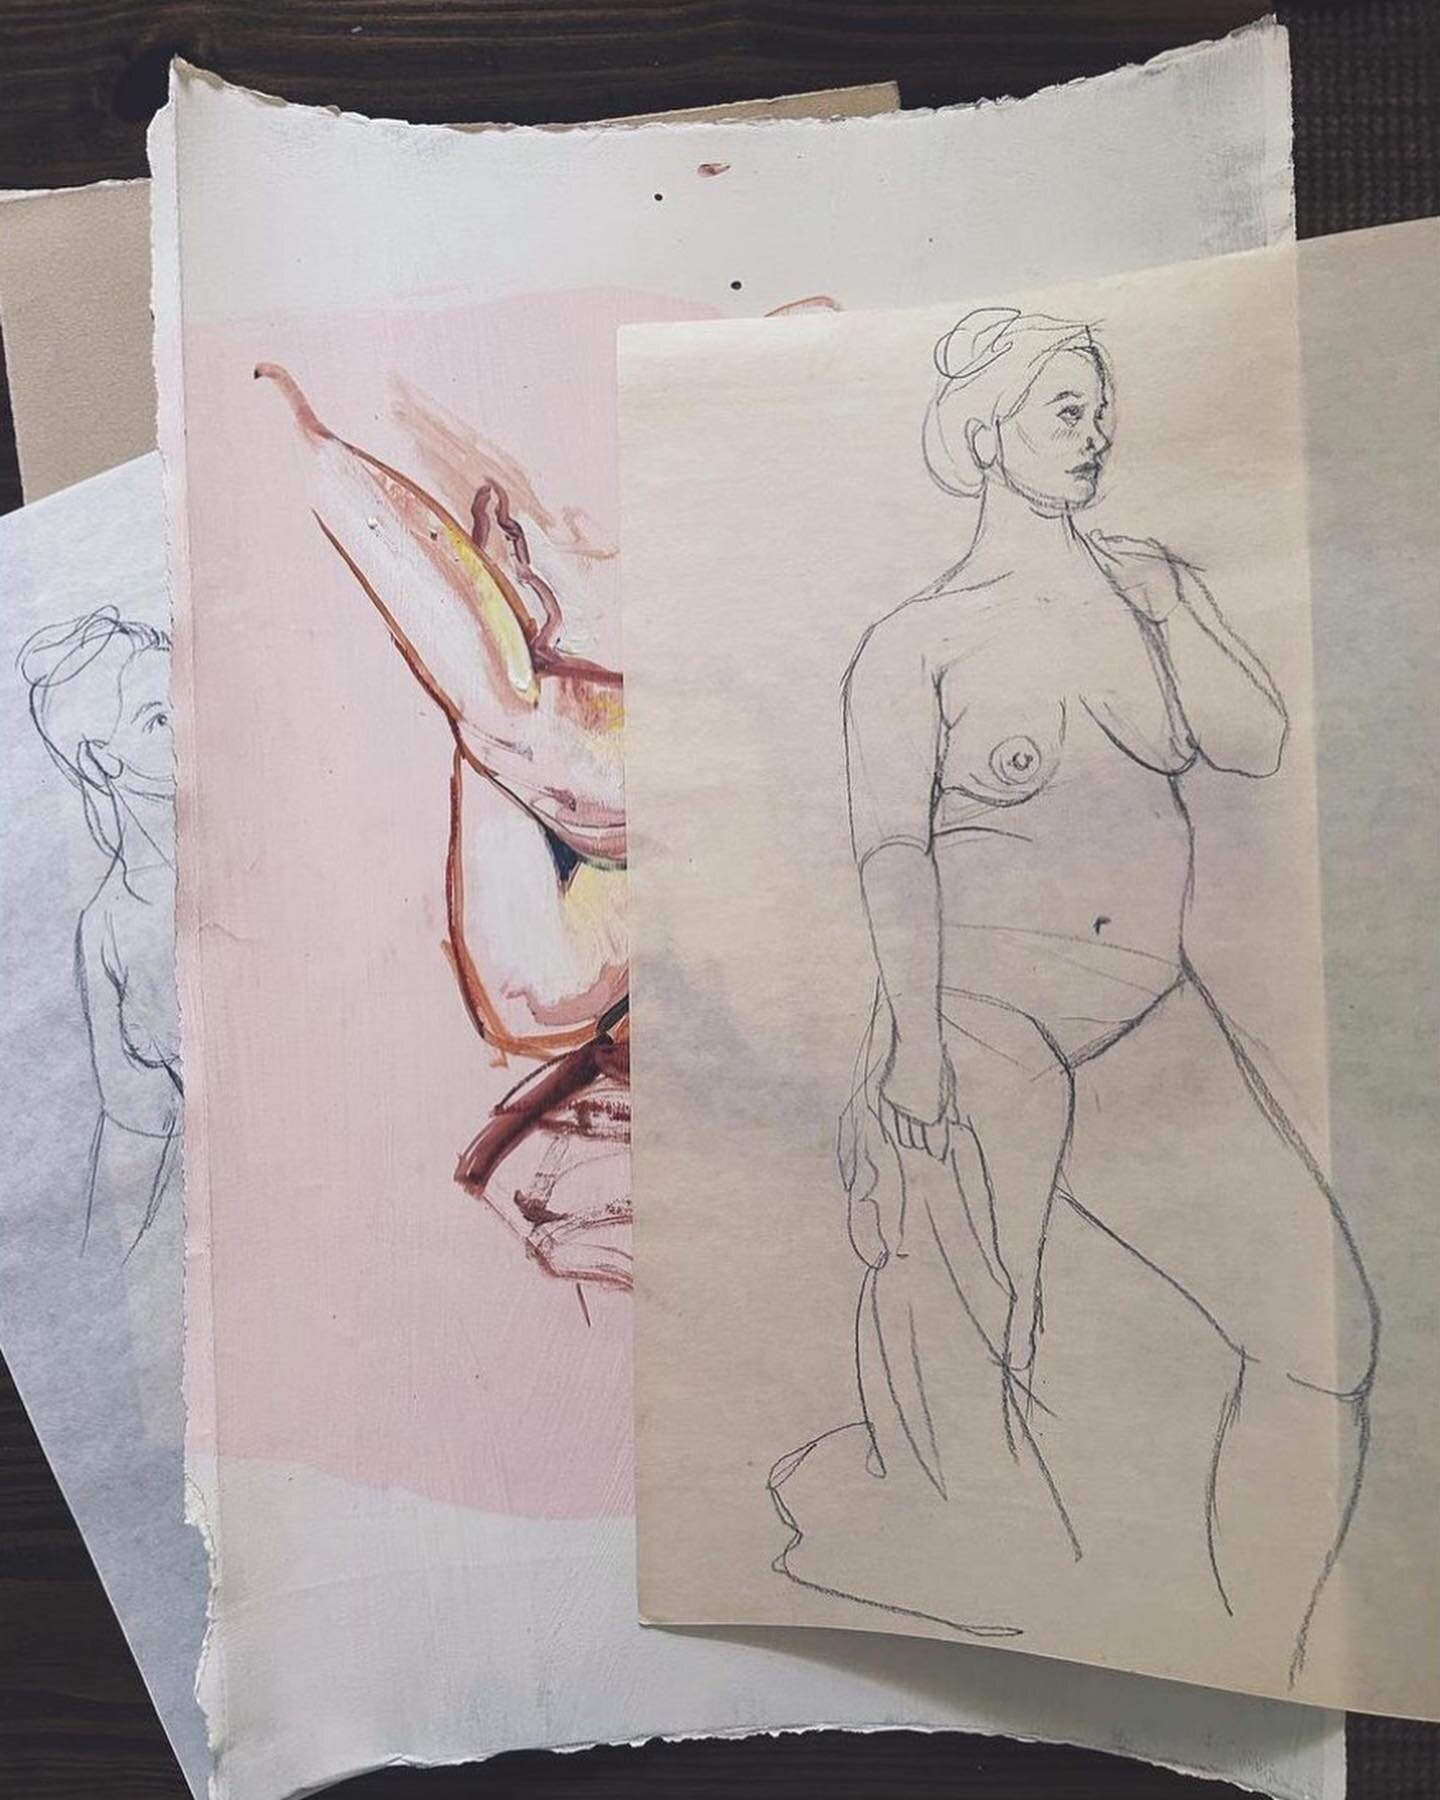 From our Life Drawing Session @maisonbodega in collaboration with @evaberezovsky. 
-
🎨